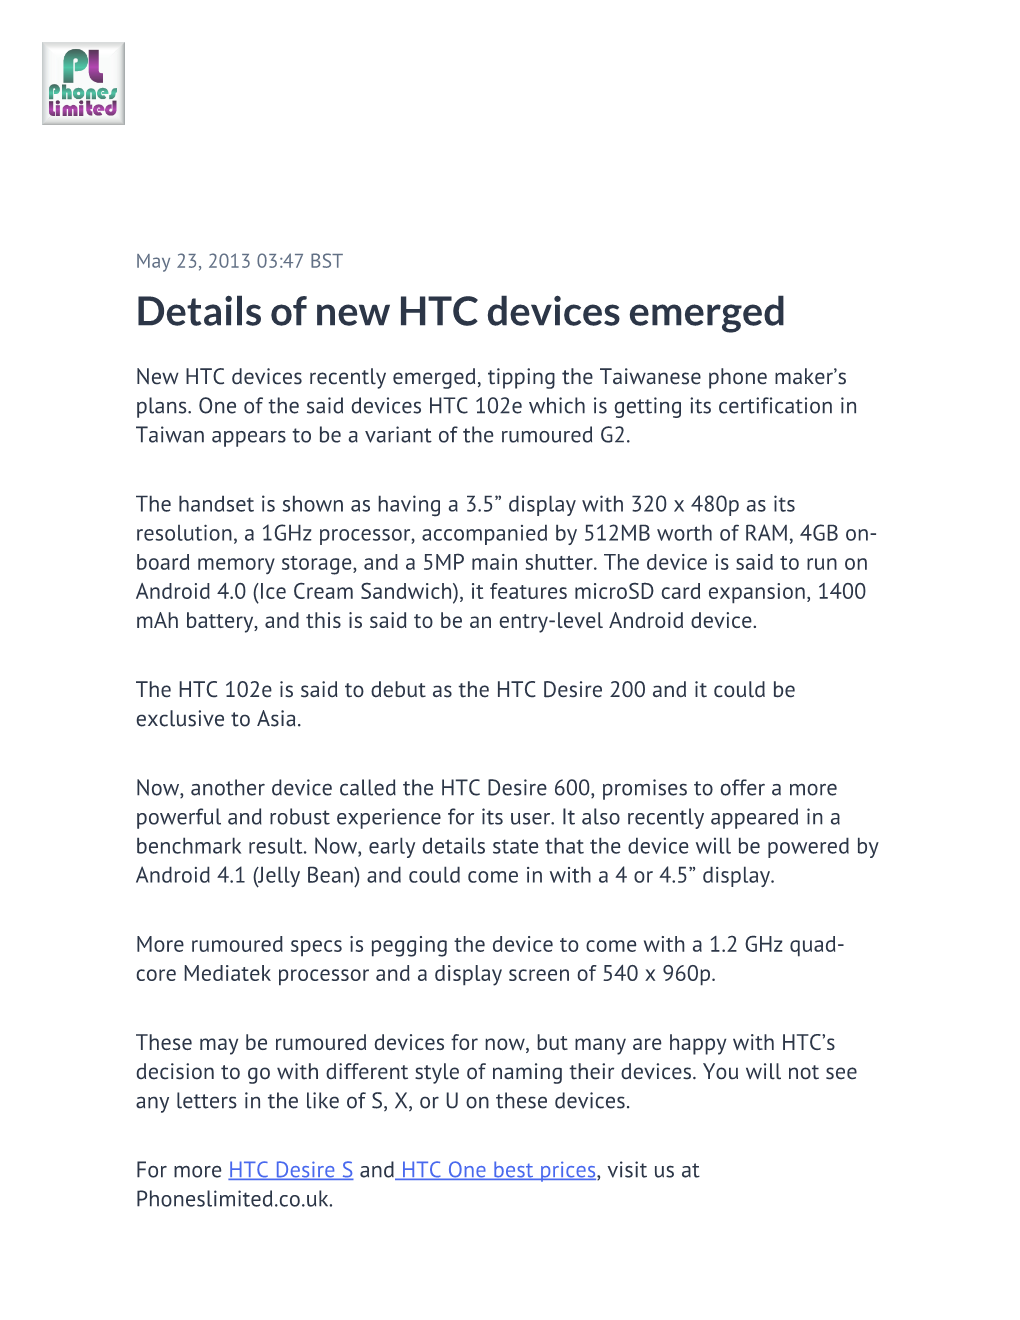 Details of New HTC Devices Emerged